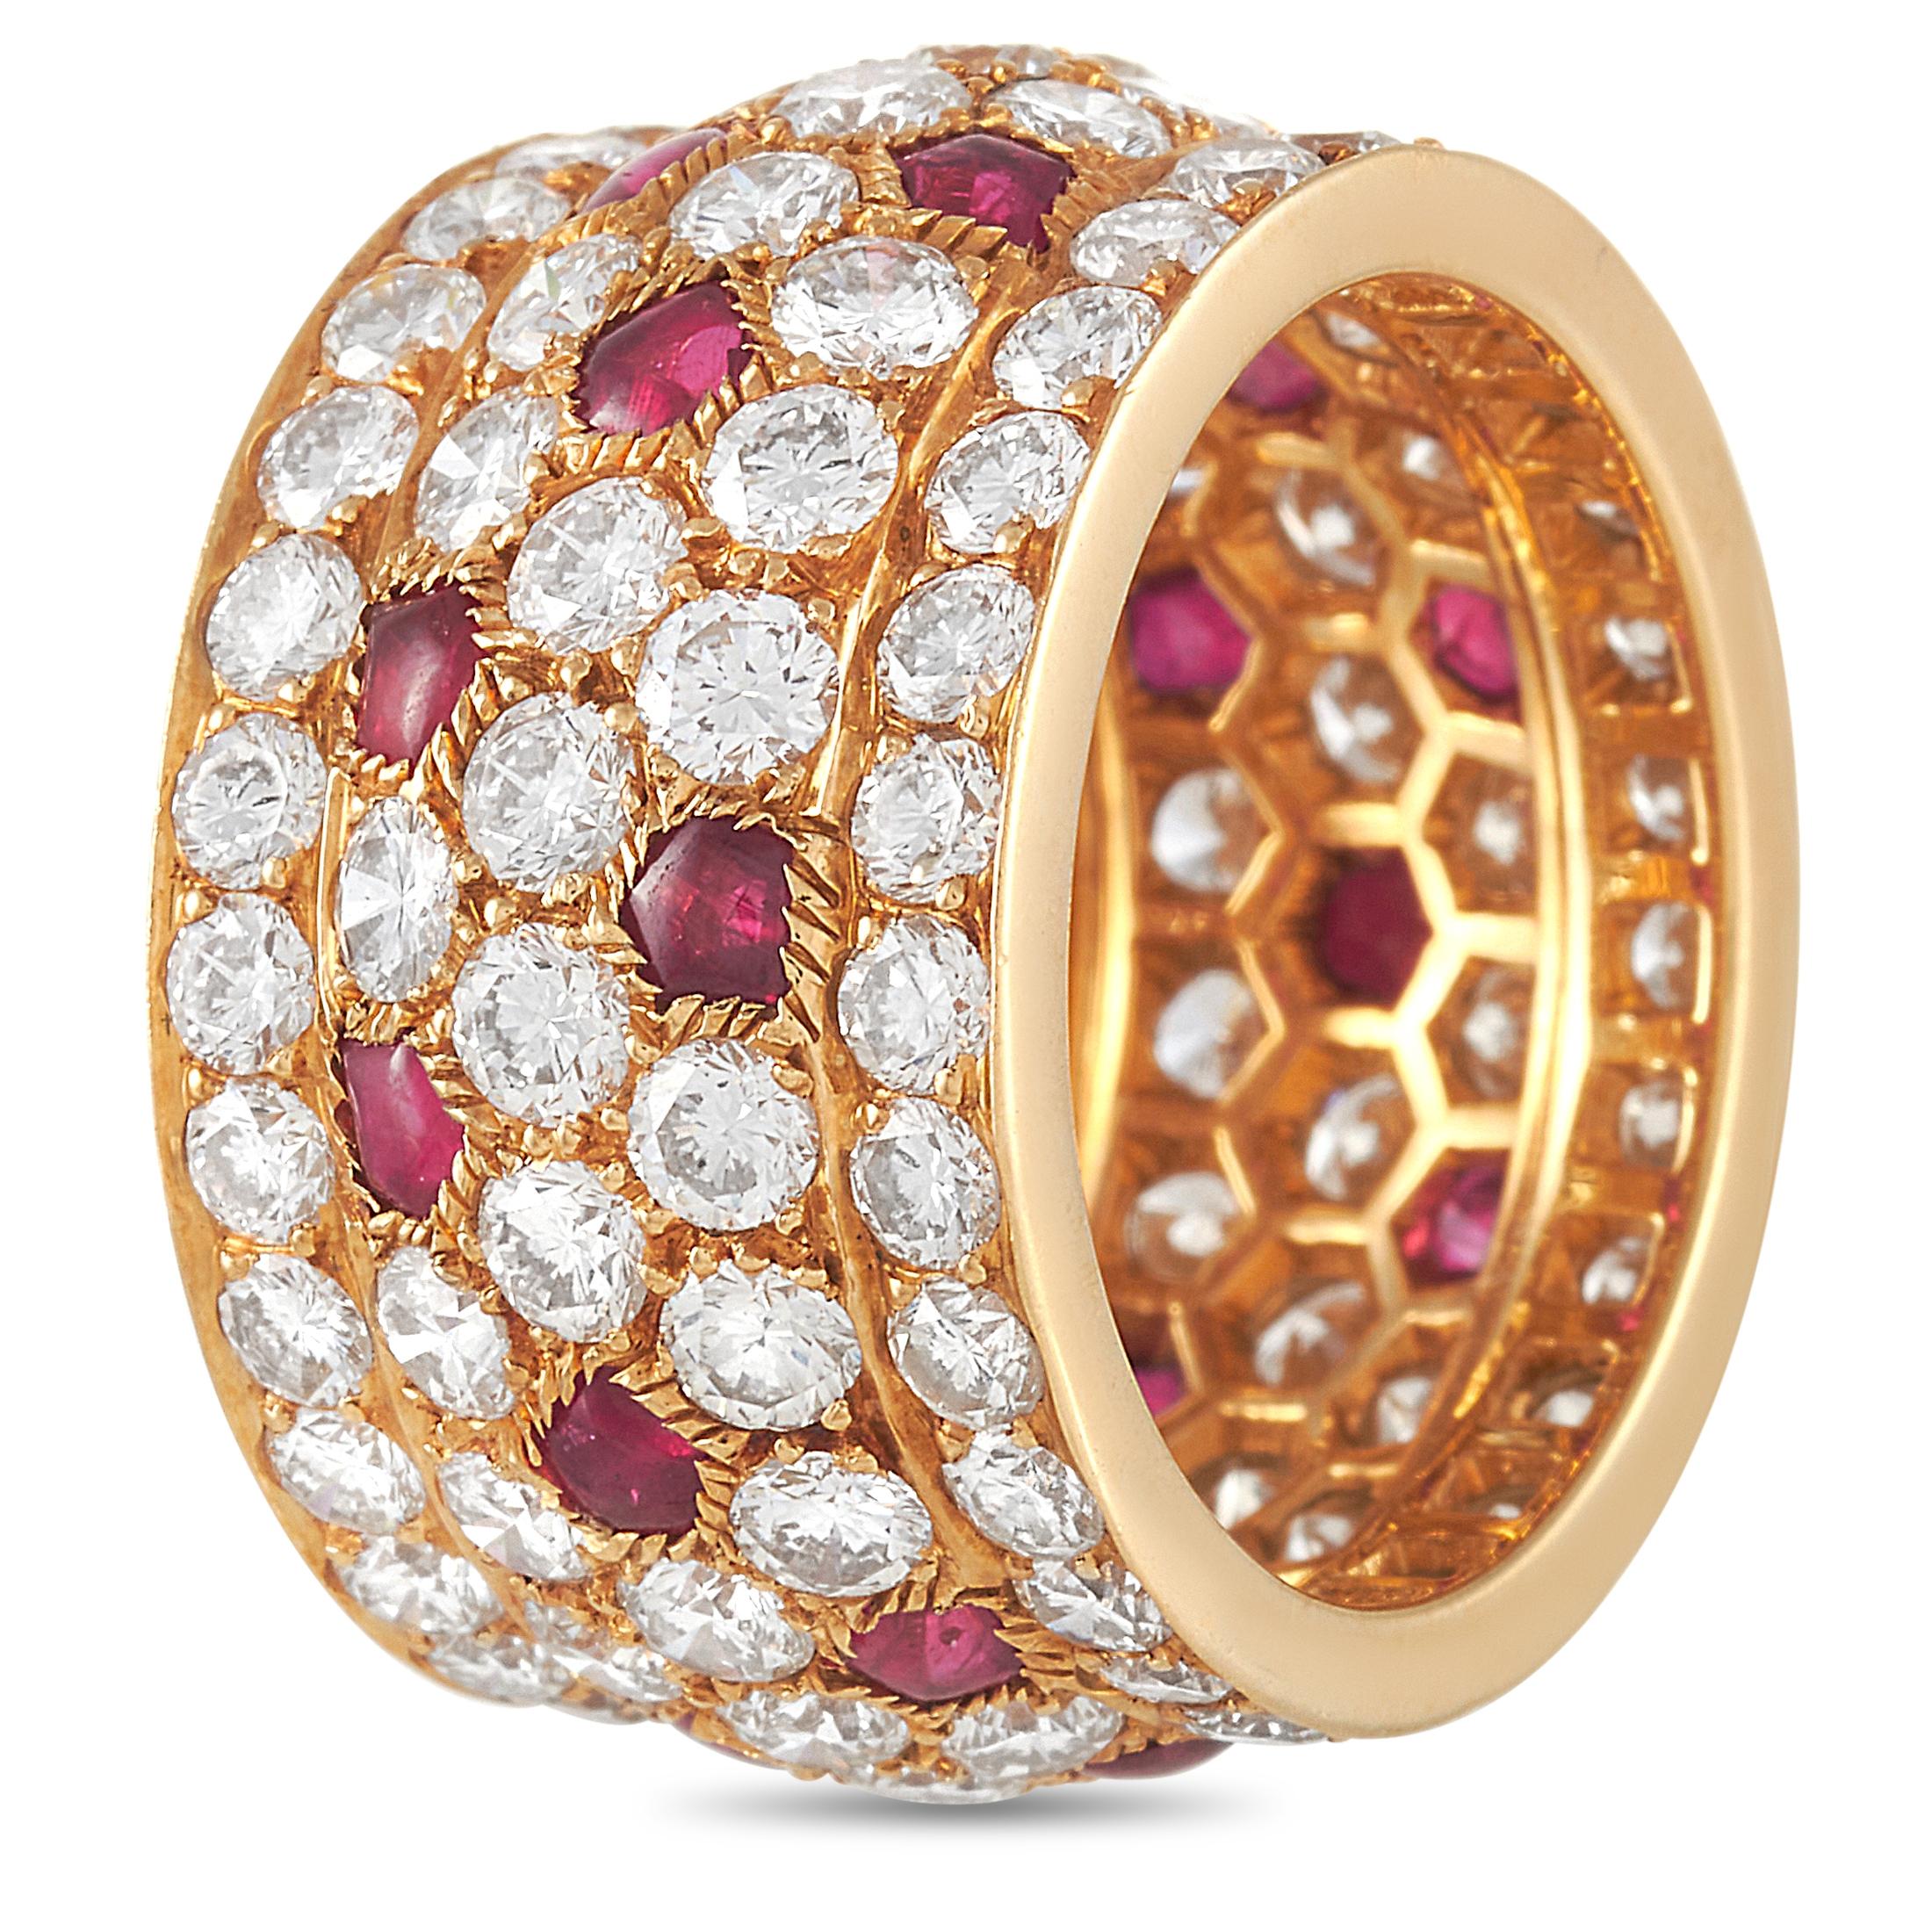 Incredibly sophisticated in design, this Cartier ring, from the Nigeria collection, is a celebration of color and form. Multiple rows of shimmering diamonds contrast beautifully against this design’s inset rubies accents and lavish 18K yellow gold